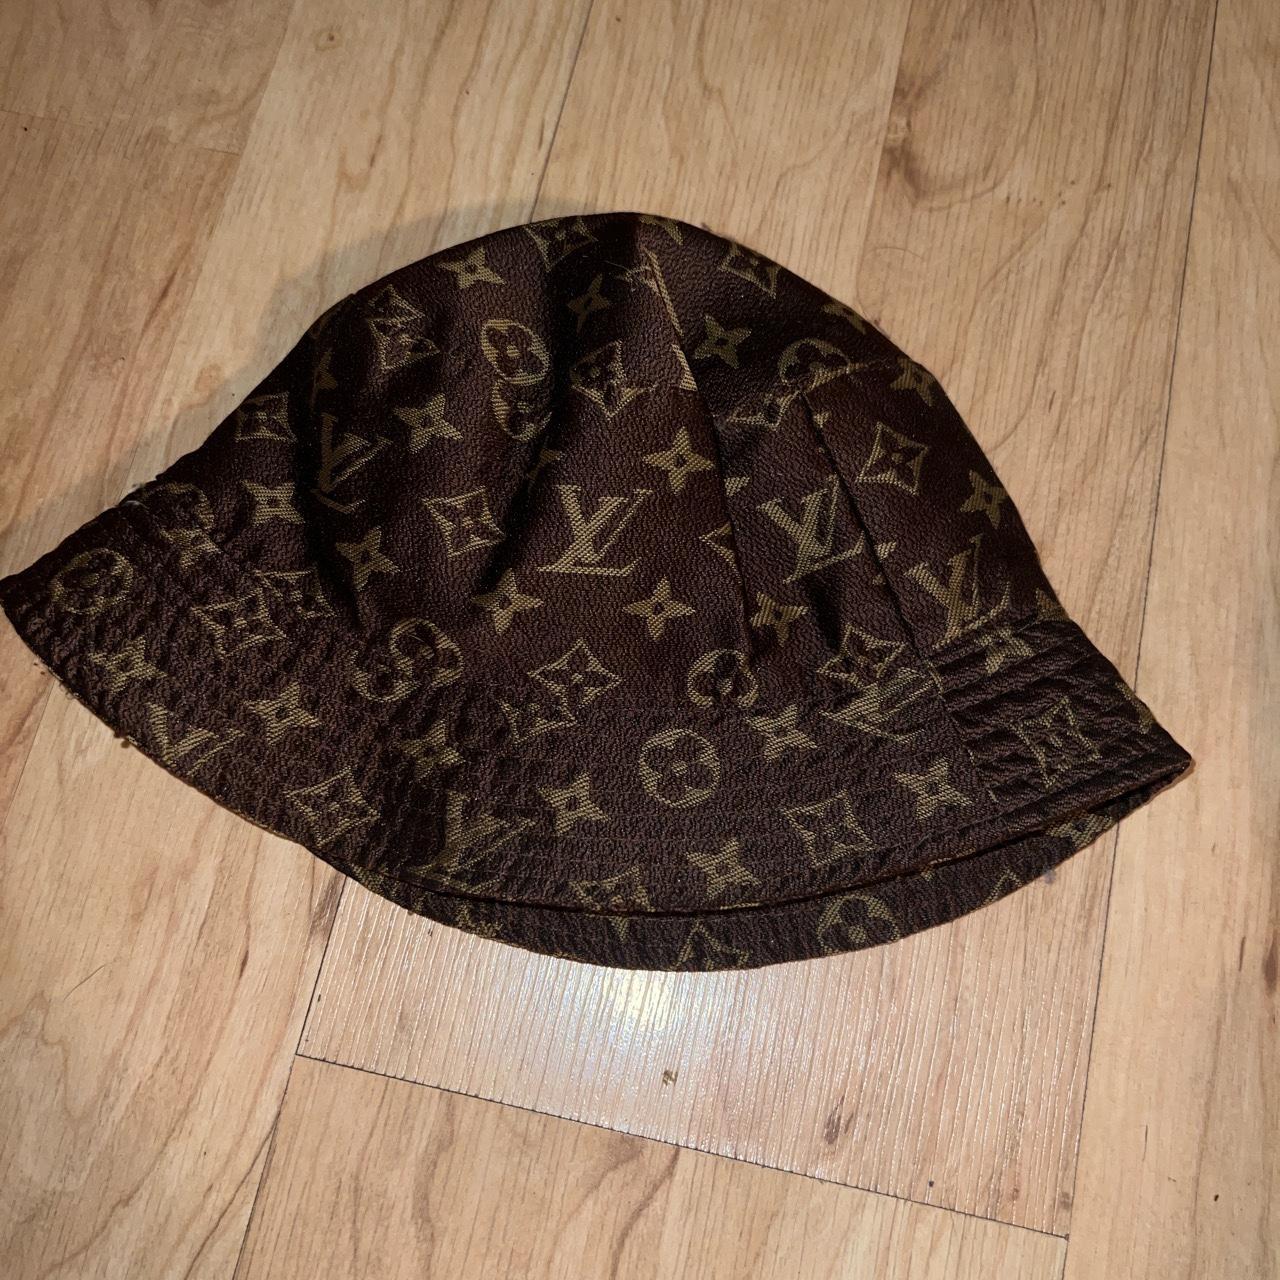 Is this Louis Vuitton bucket hat real?